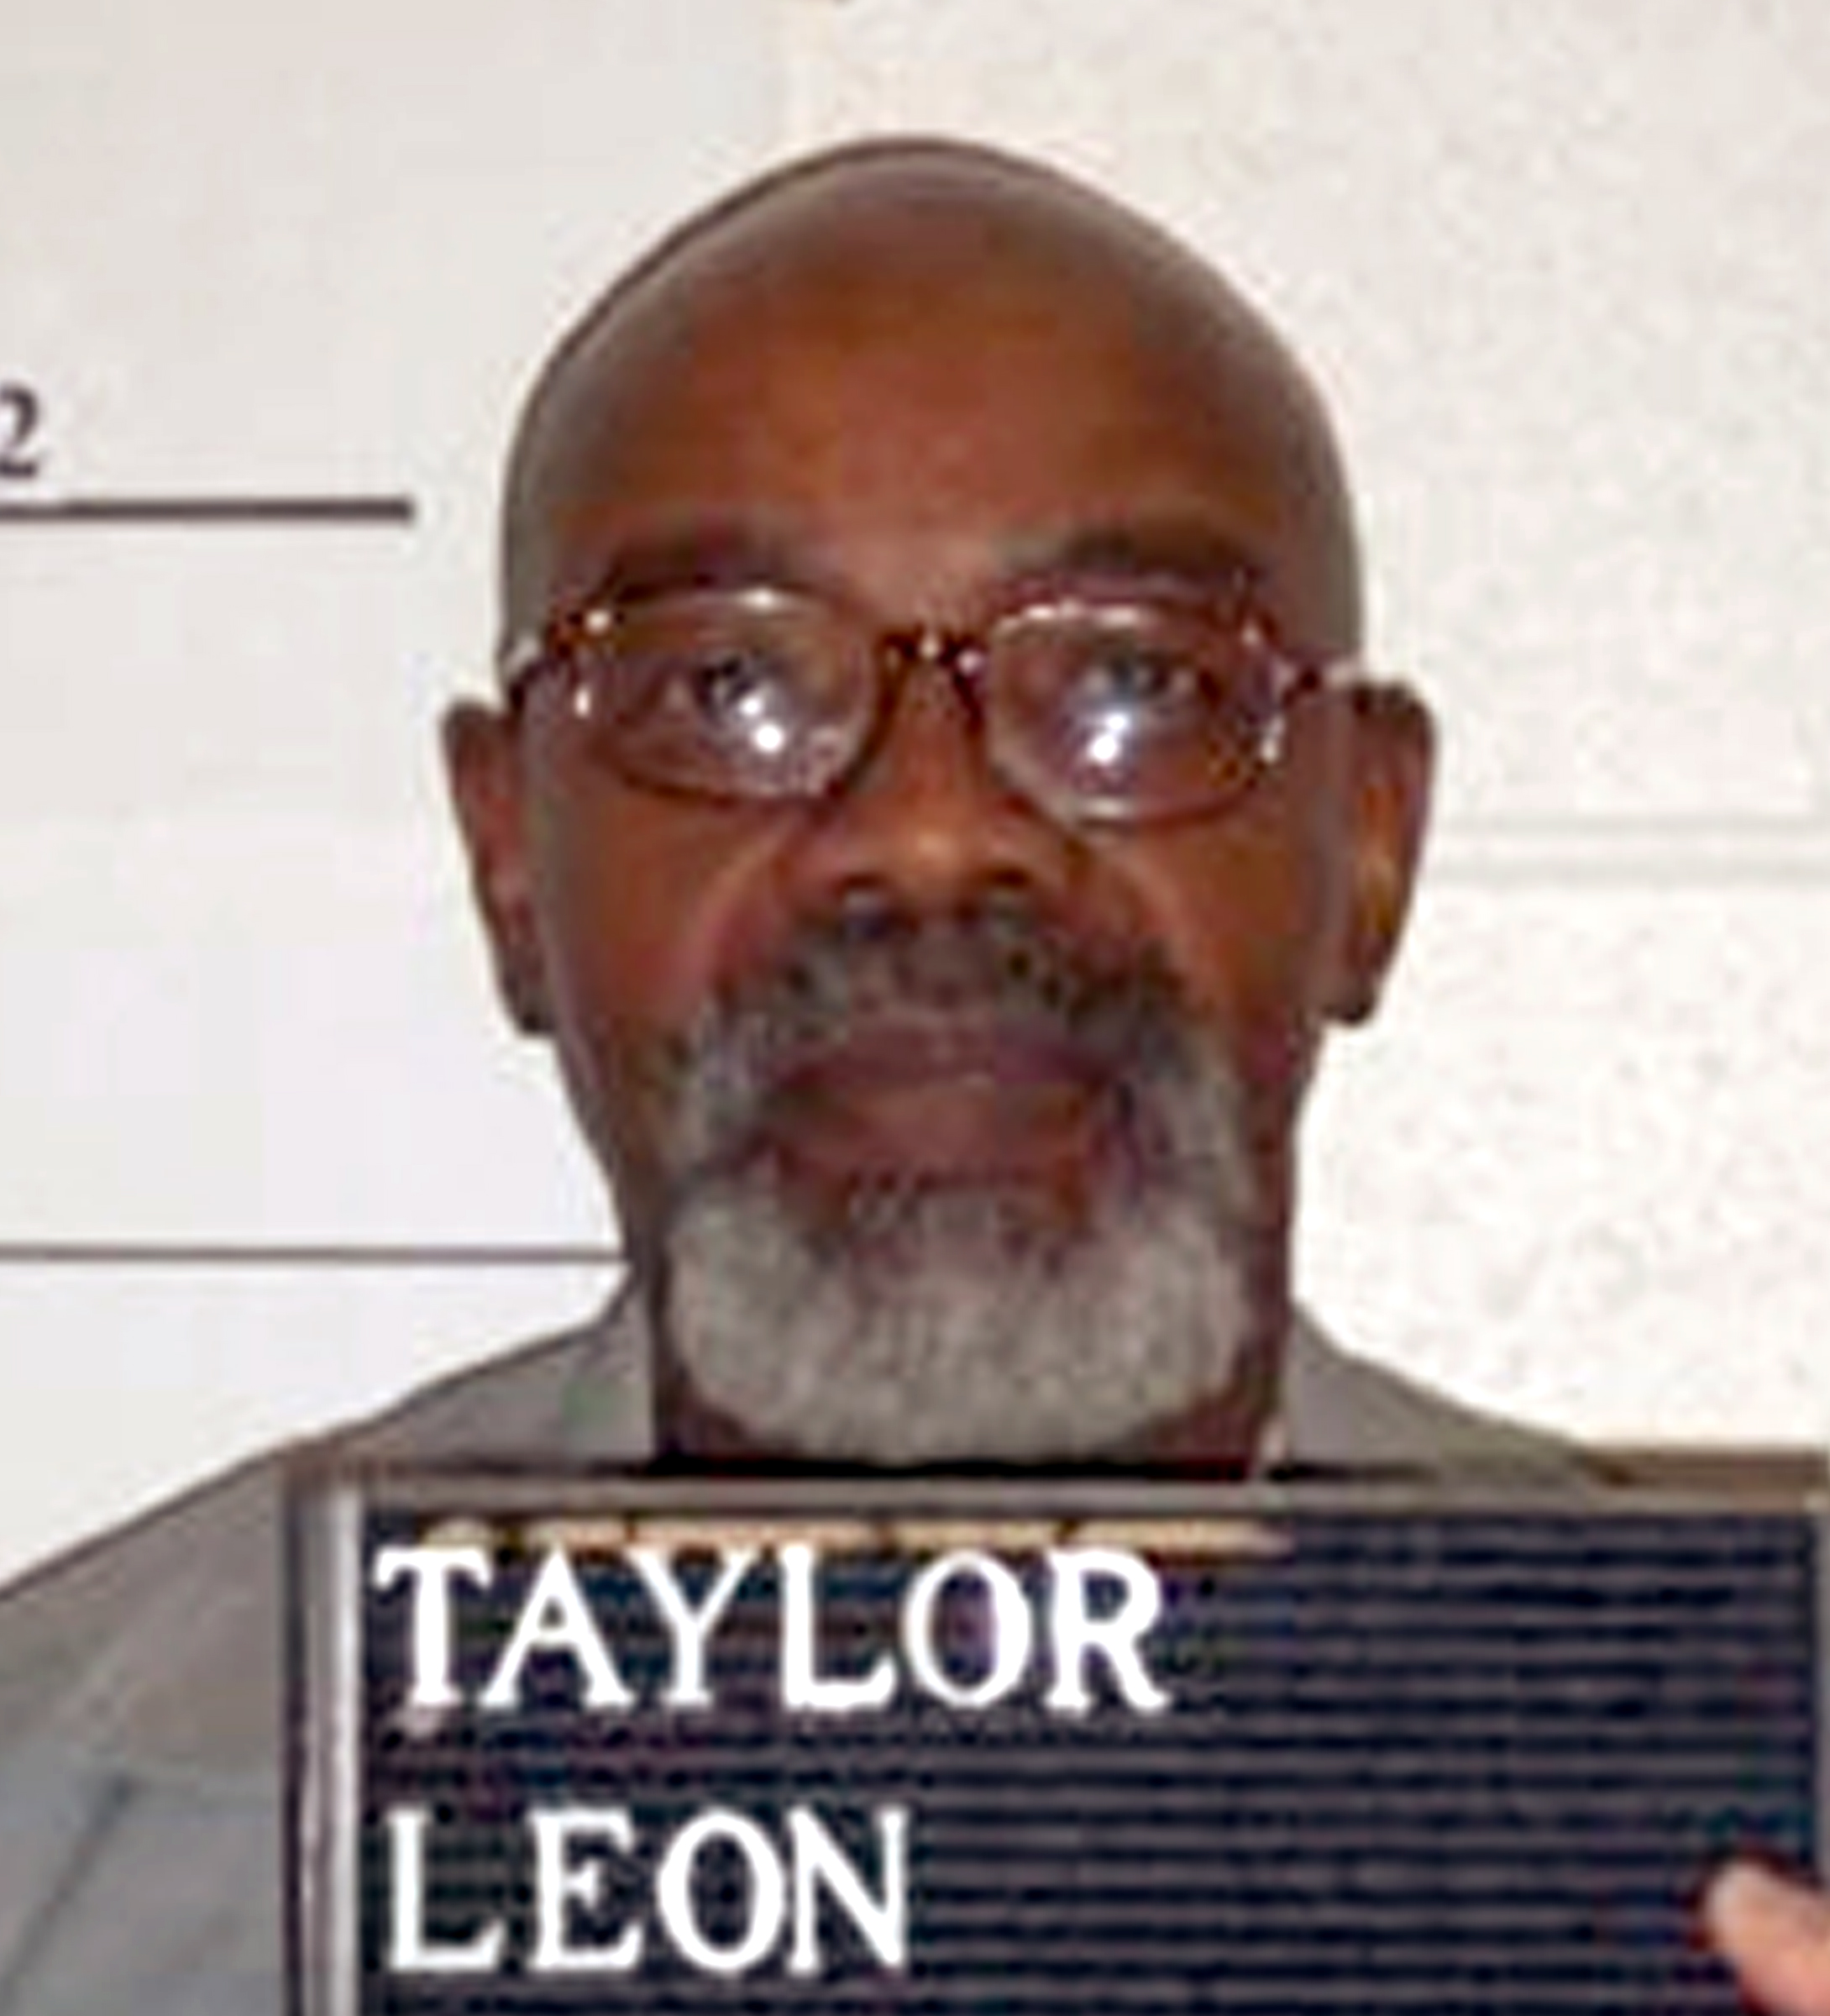 Leon Taylor, sentenced to death in the killing of a gas station attendant, was executed by lethal injection early Wednesday morning. (AP)